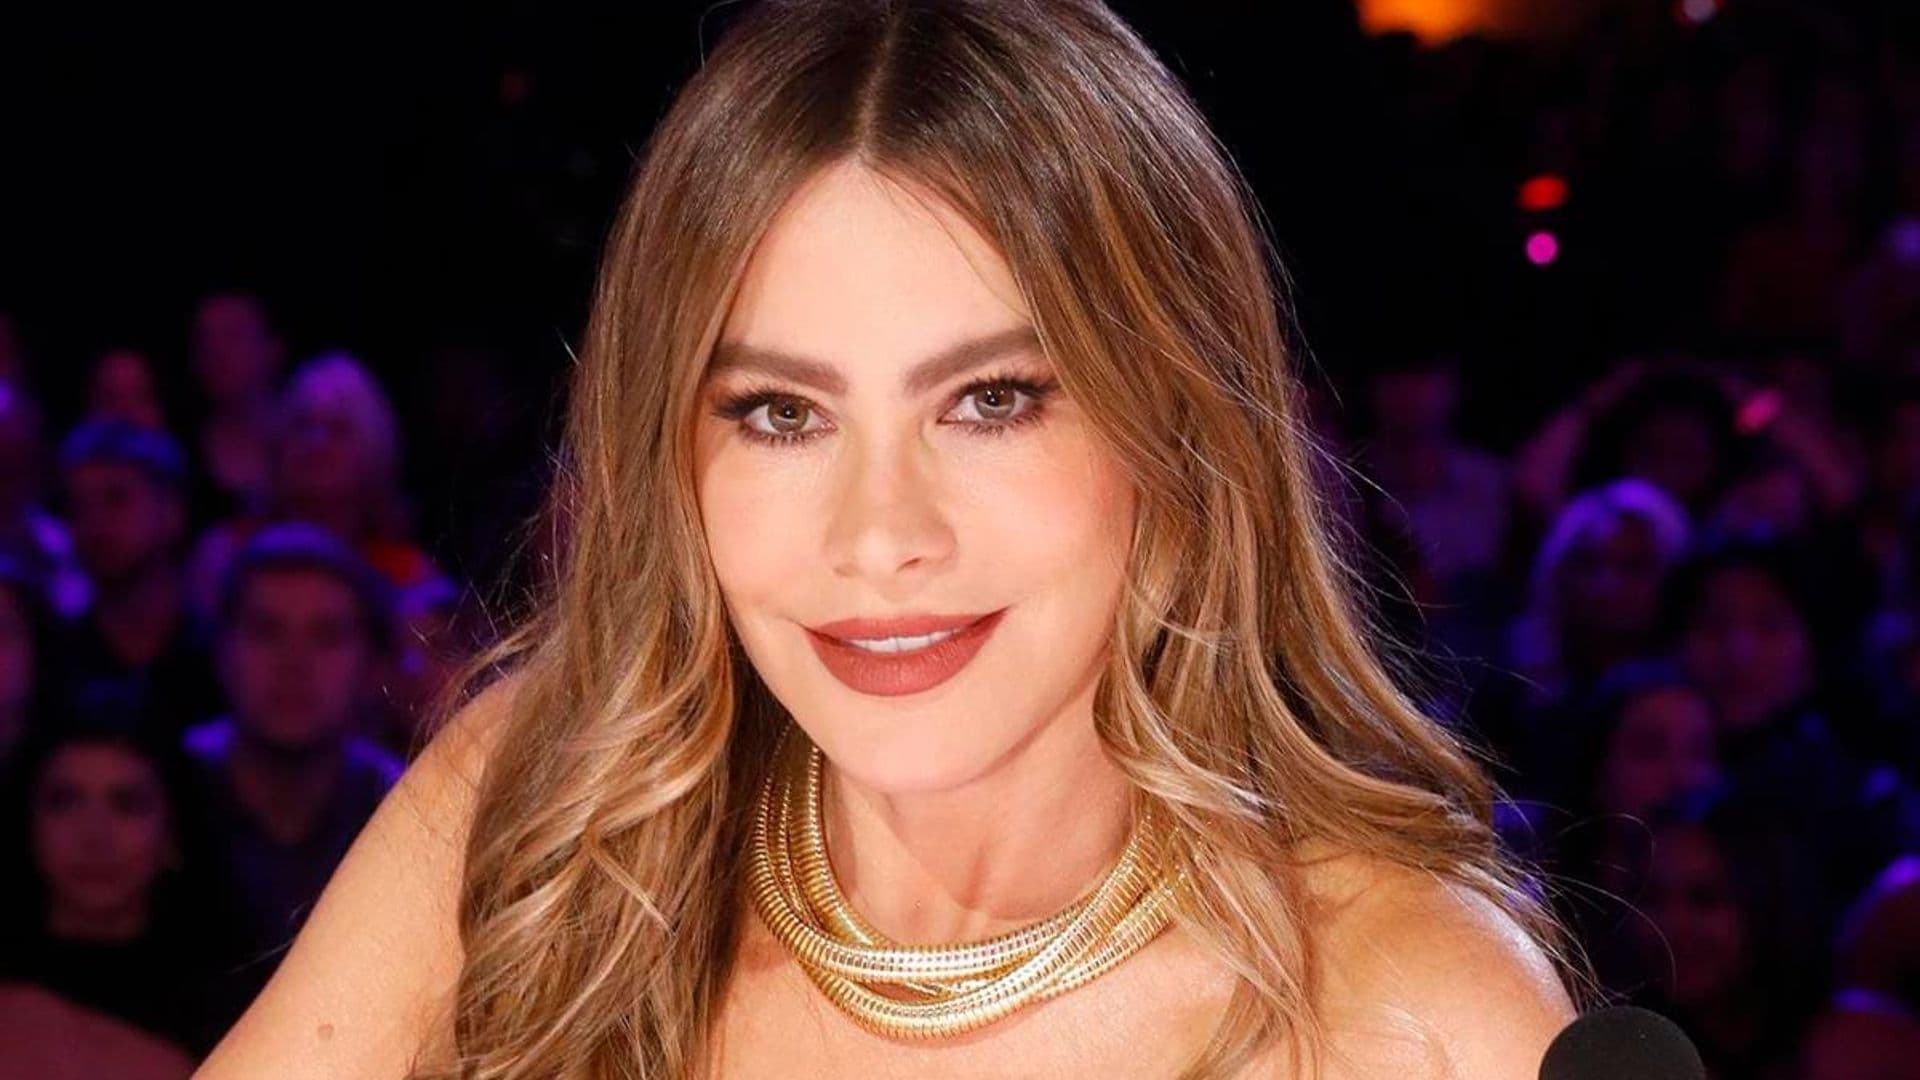 Sofia Vergara shares a sneak peek of her holiday collection dancing to Bad Bunny’s hit song